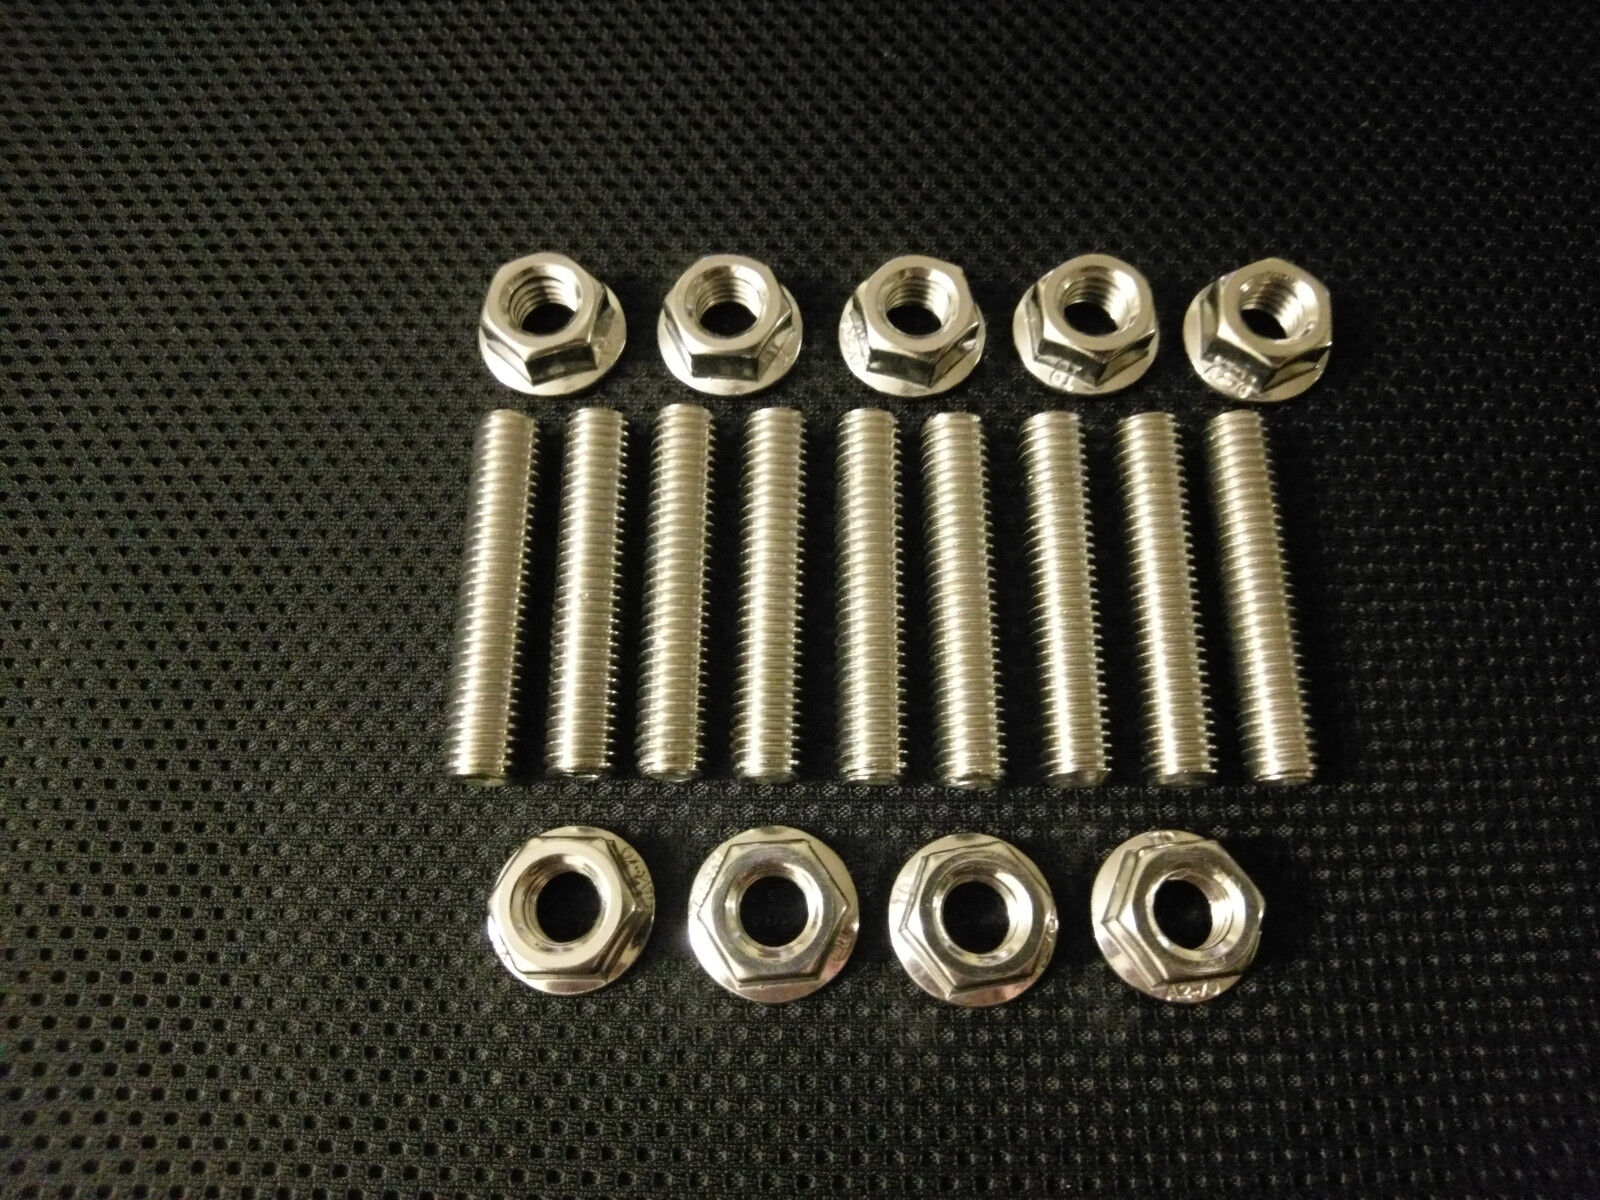 Vauxhall Exhaust Studs and Flange Nuts Stainless Steel Corsa Zafira Astra 